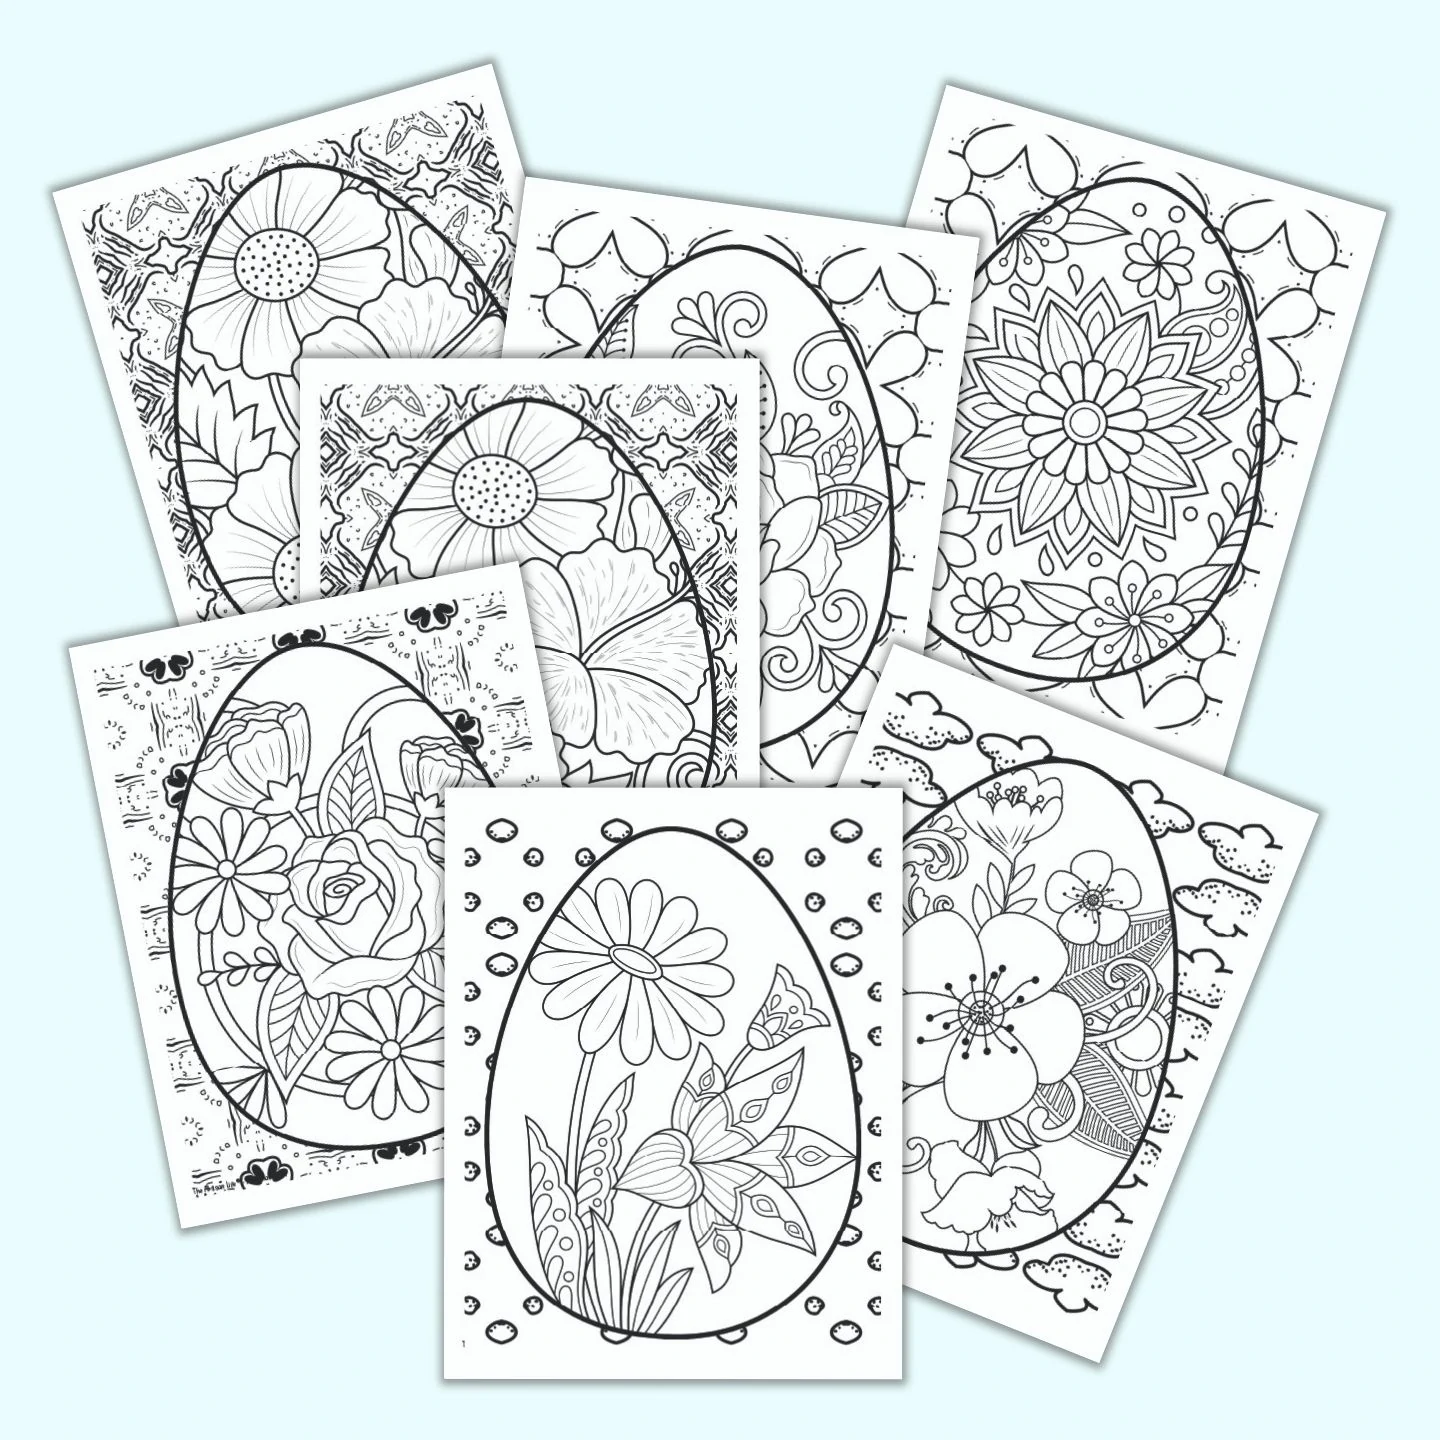 Free Printable Easter Egg Coloring Pages for Adults   The Artisan Life